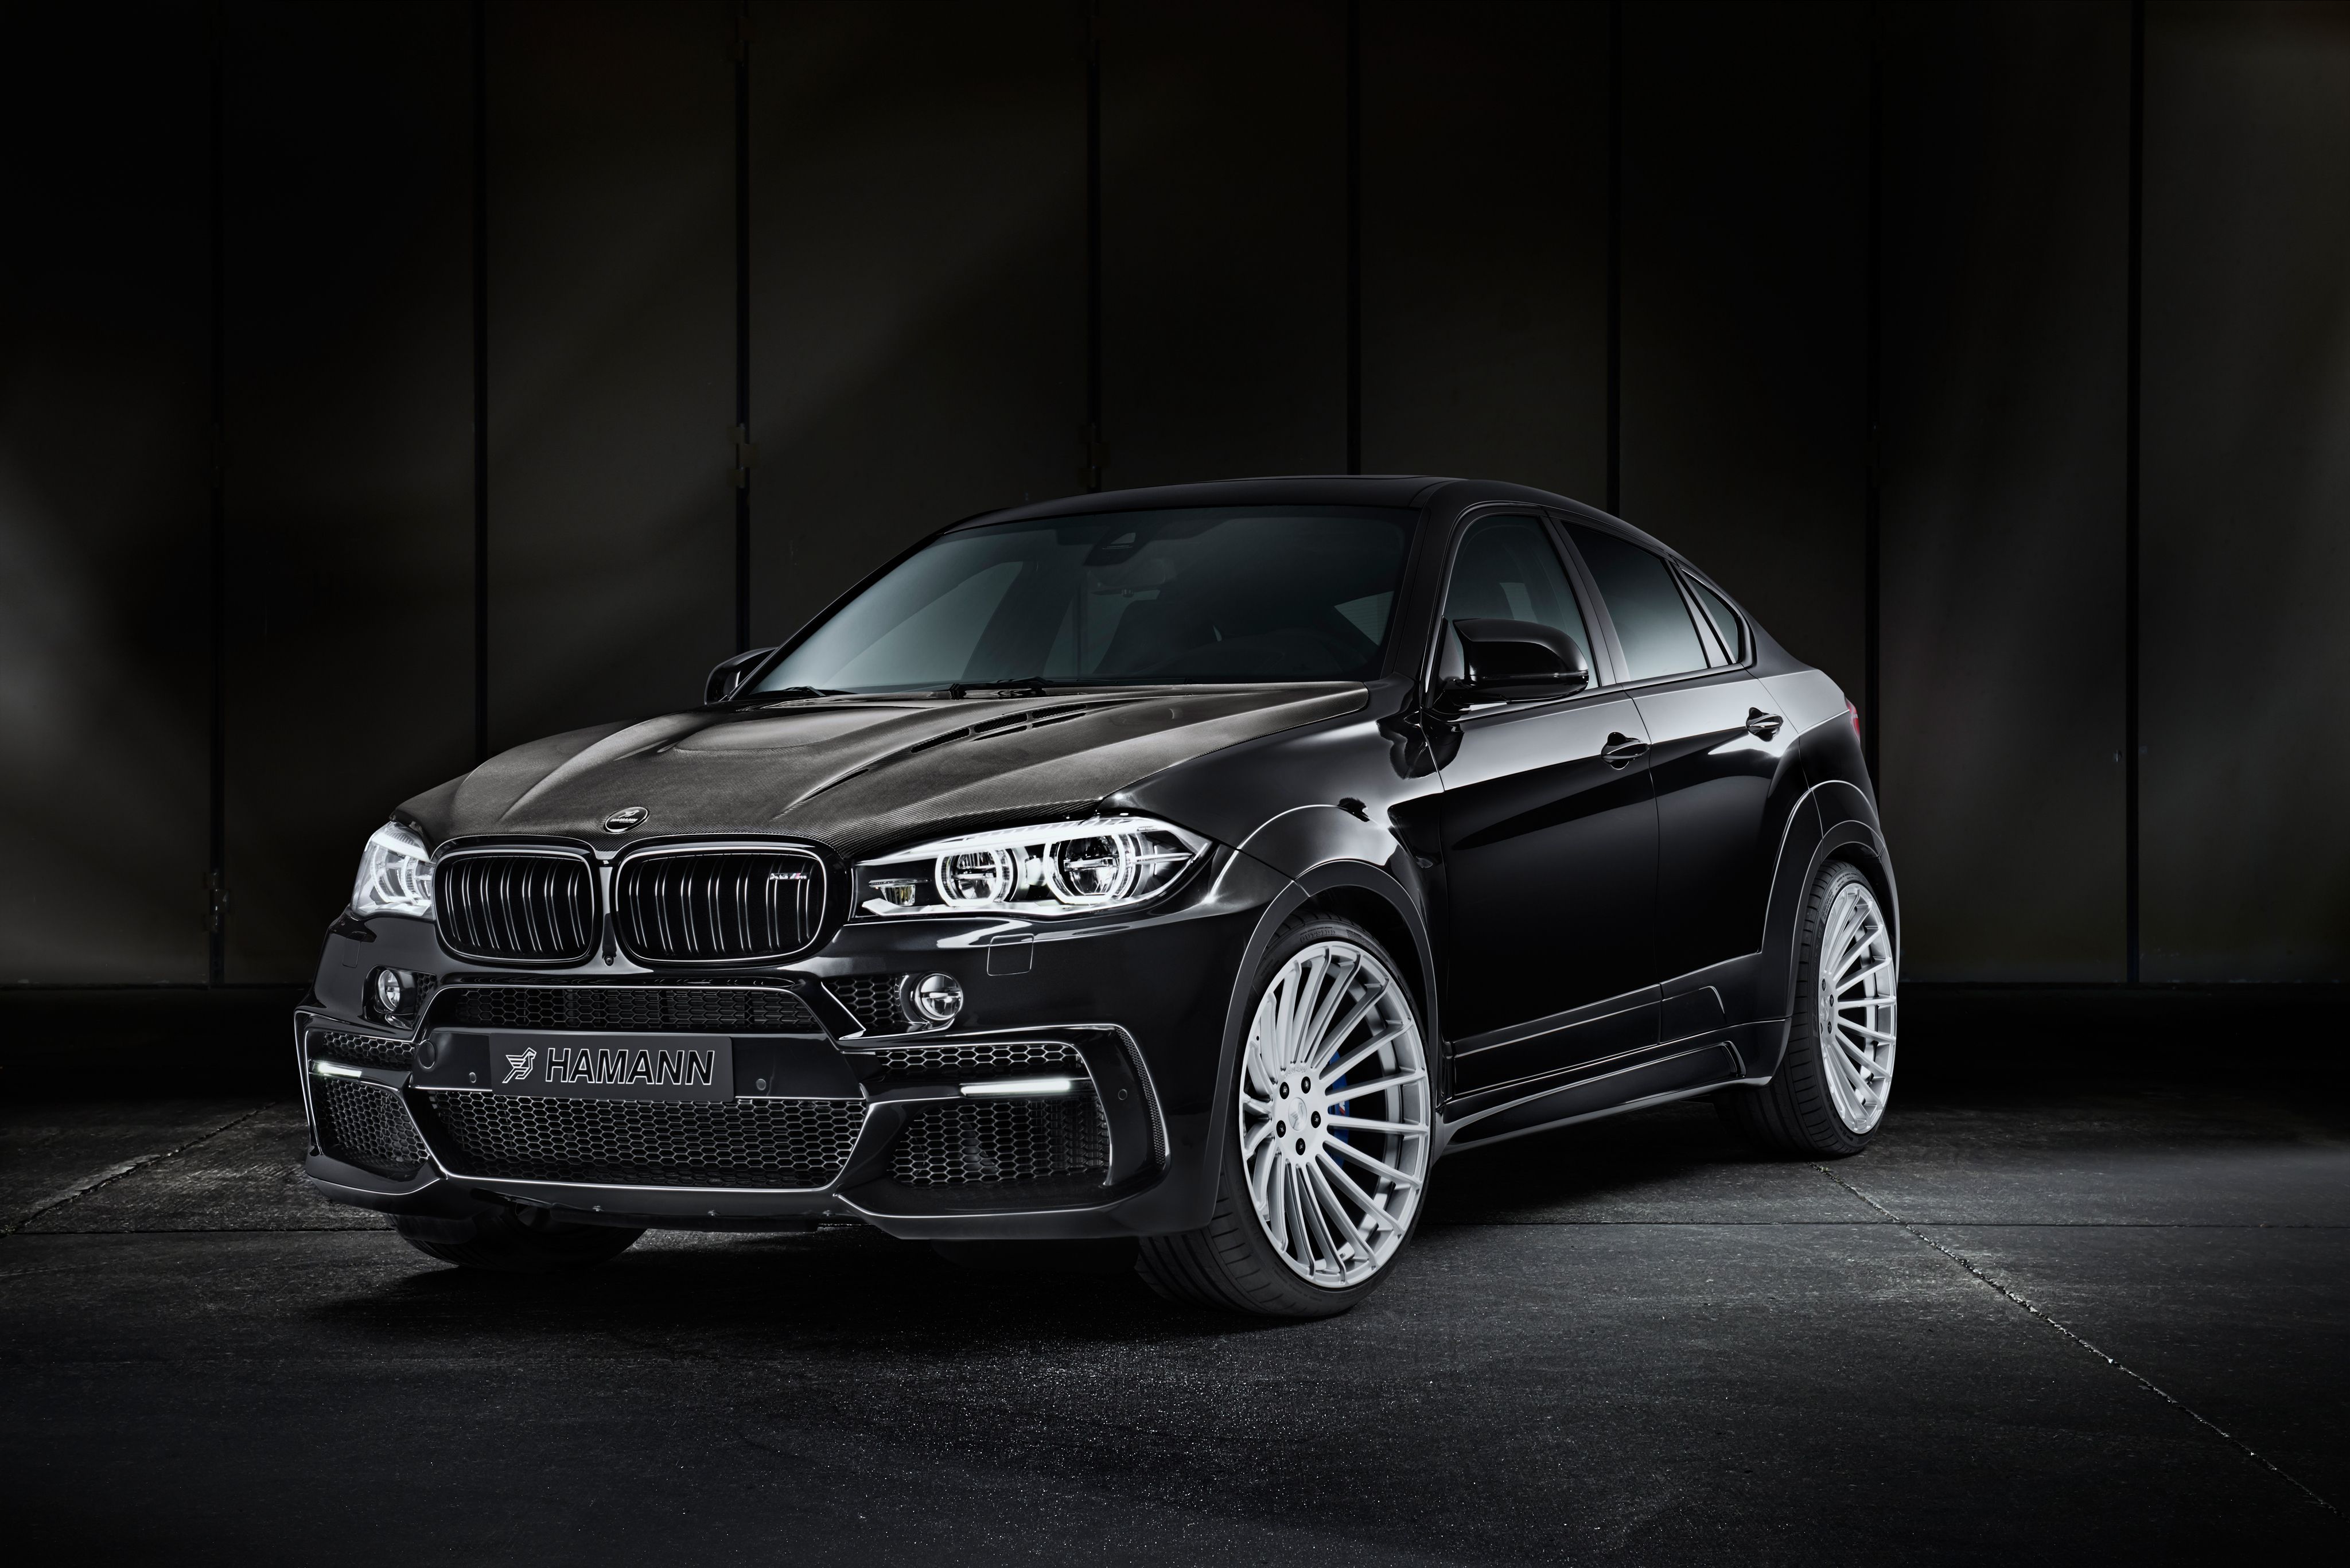 BMW X6 Wallpaper, Picture, Image